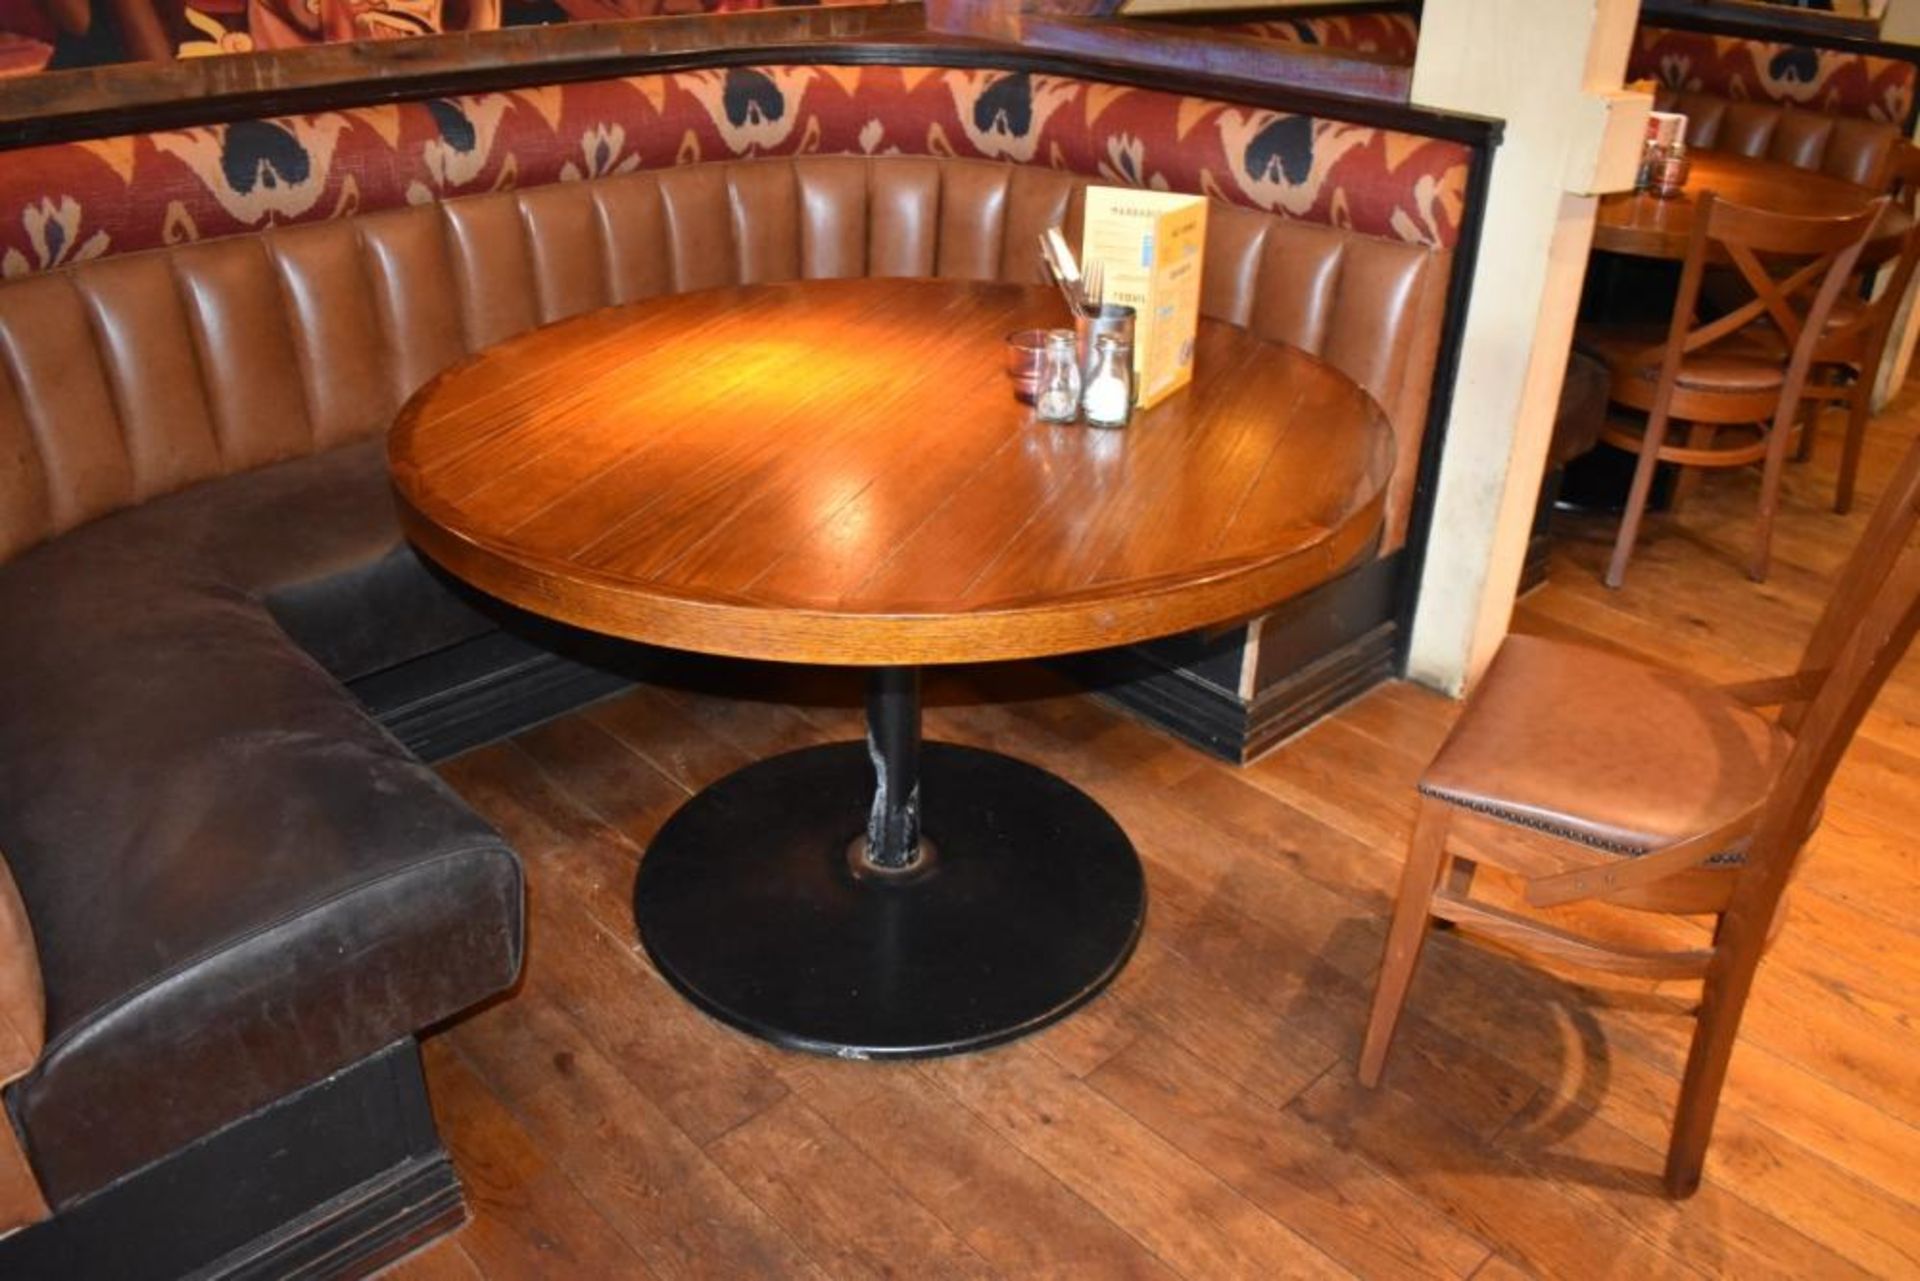 1 x Large Restaurant Dining Table With Brown Panelled Effect Top and Cast Iron Bases - H76 x W120 cm - Image 3 of 4